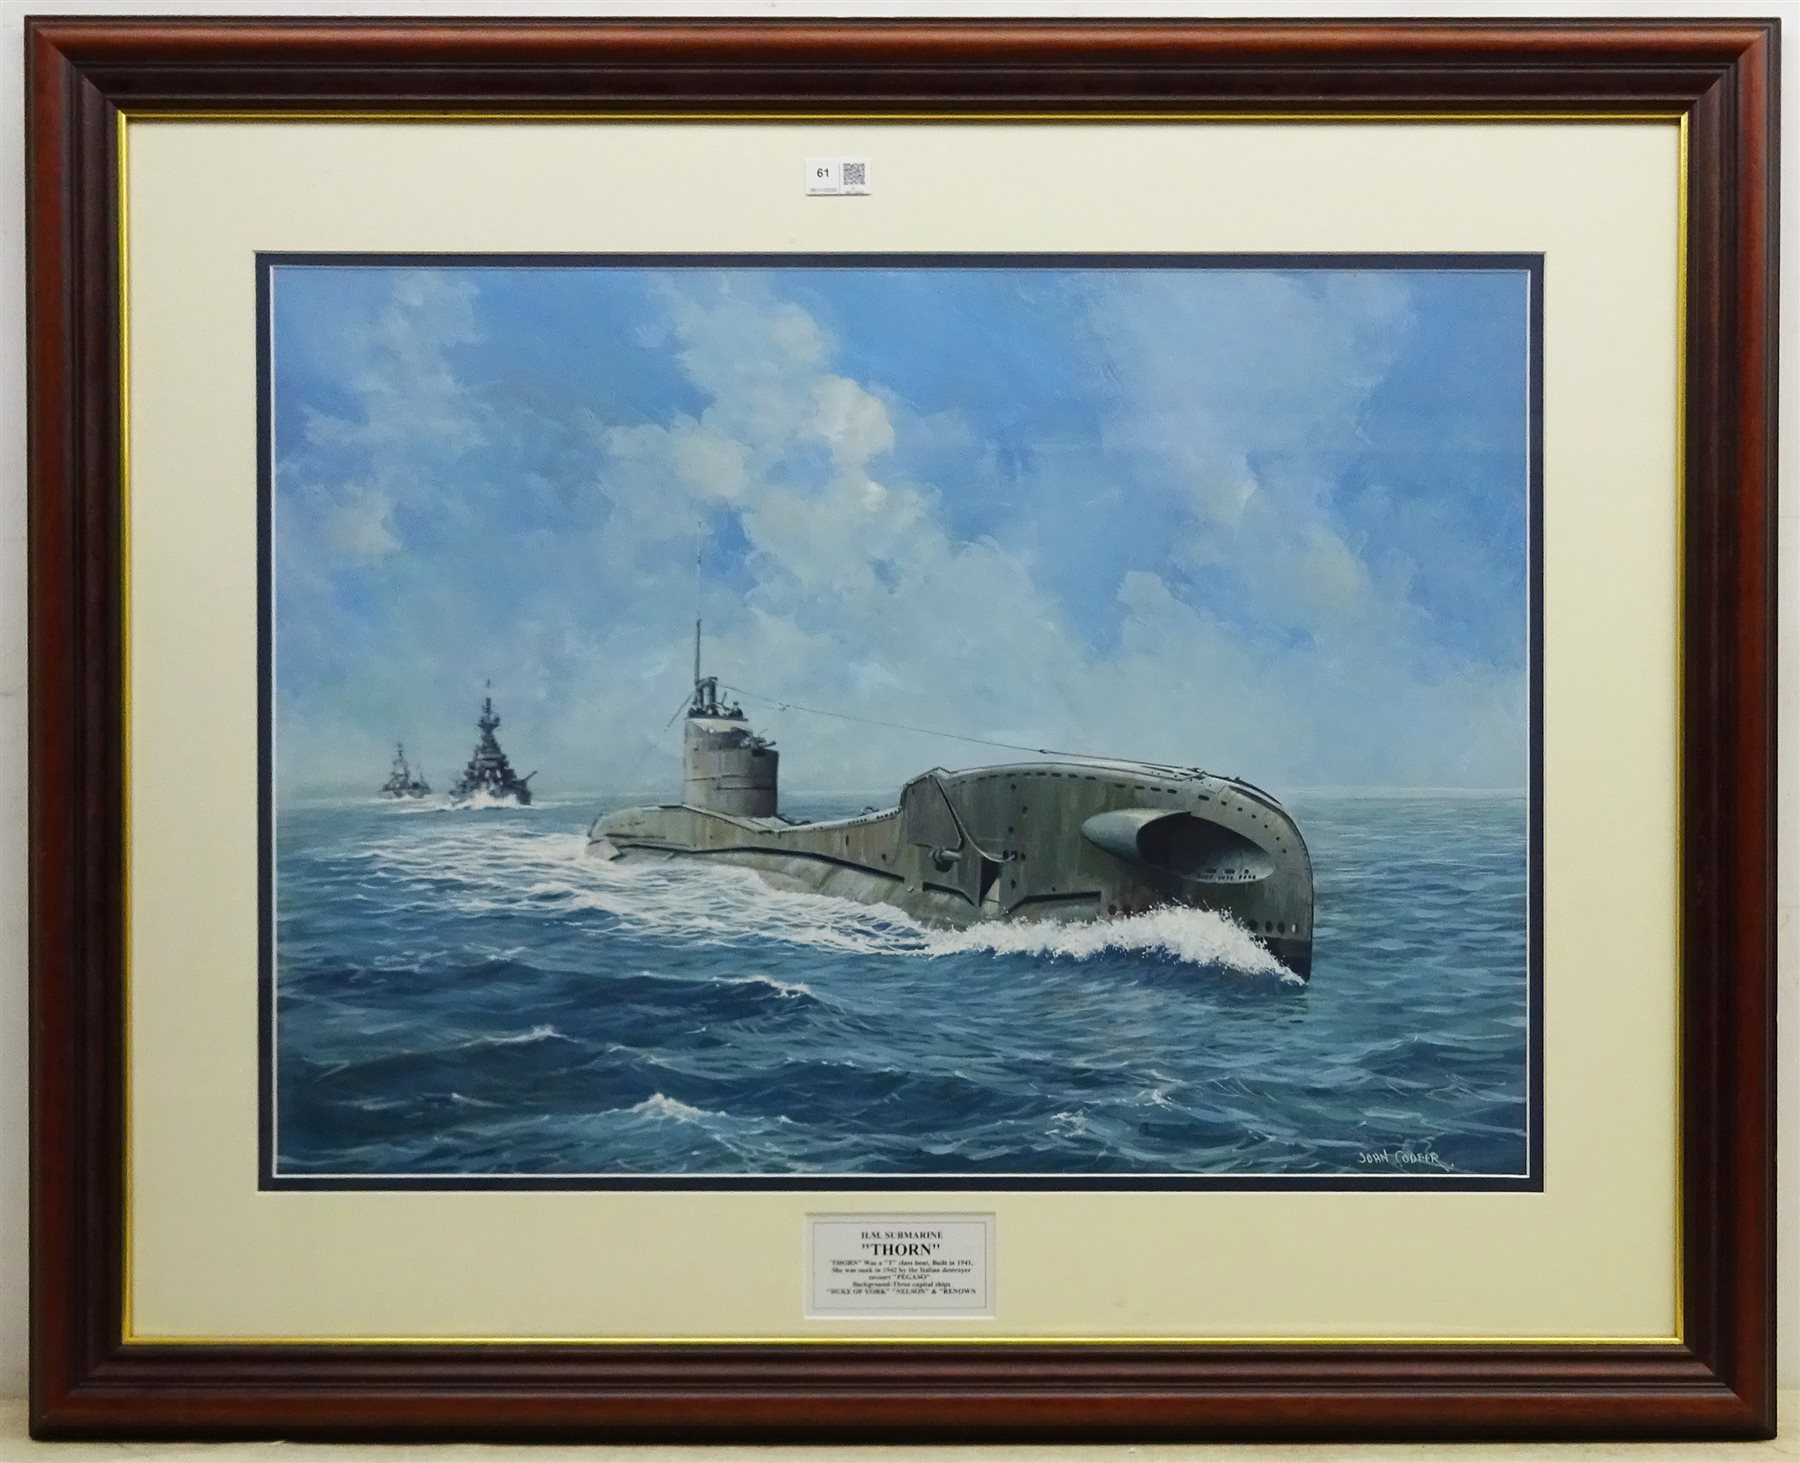 John Cooper (British 1942-): Ship's Portrait - H M Submarine 'Thorn', watercolour and gouache signed - Image 3 of 4